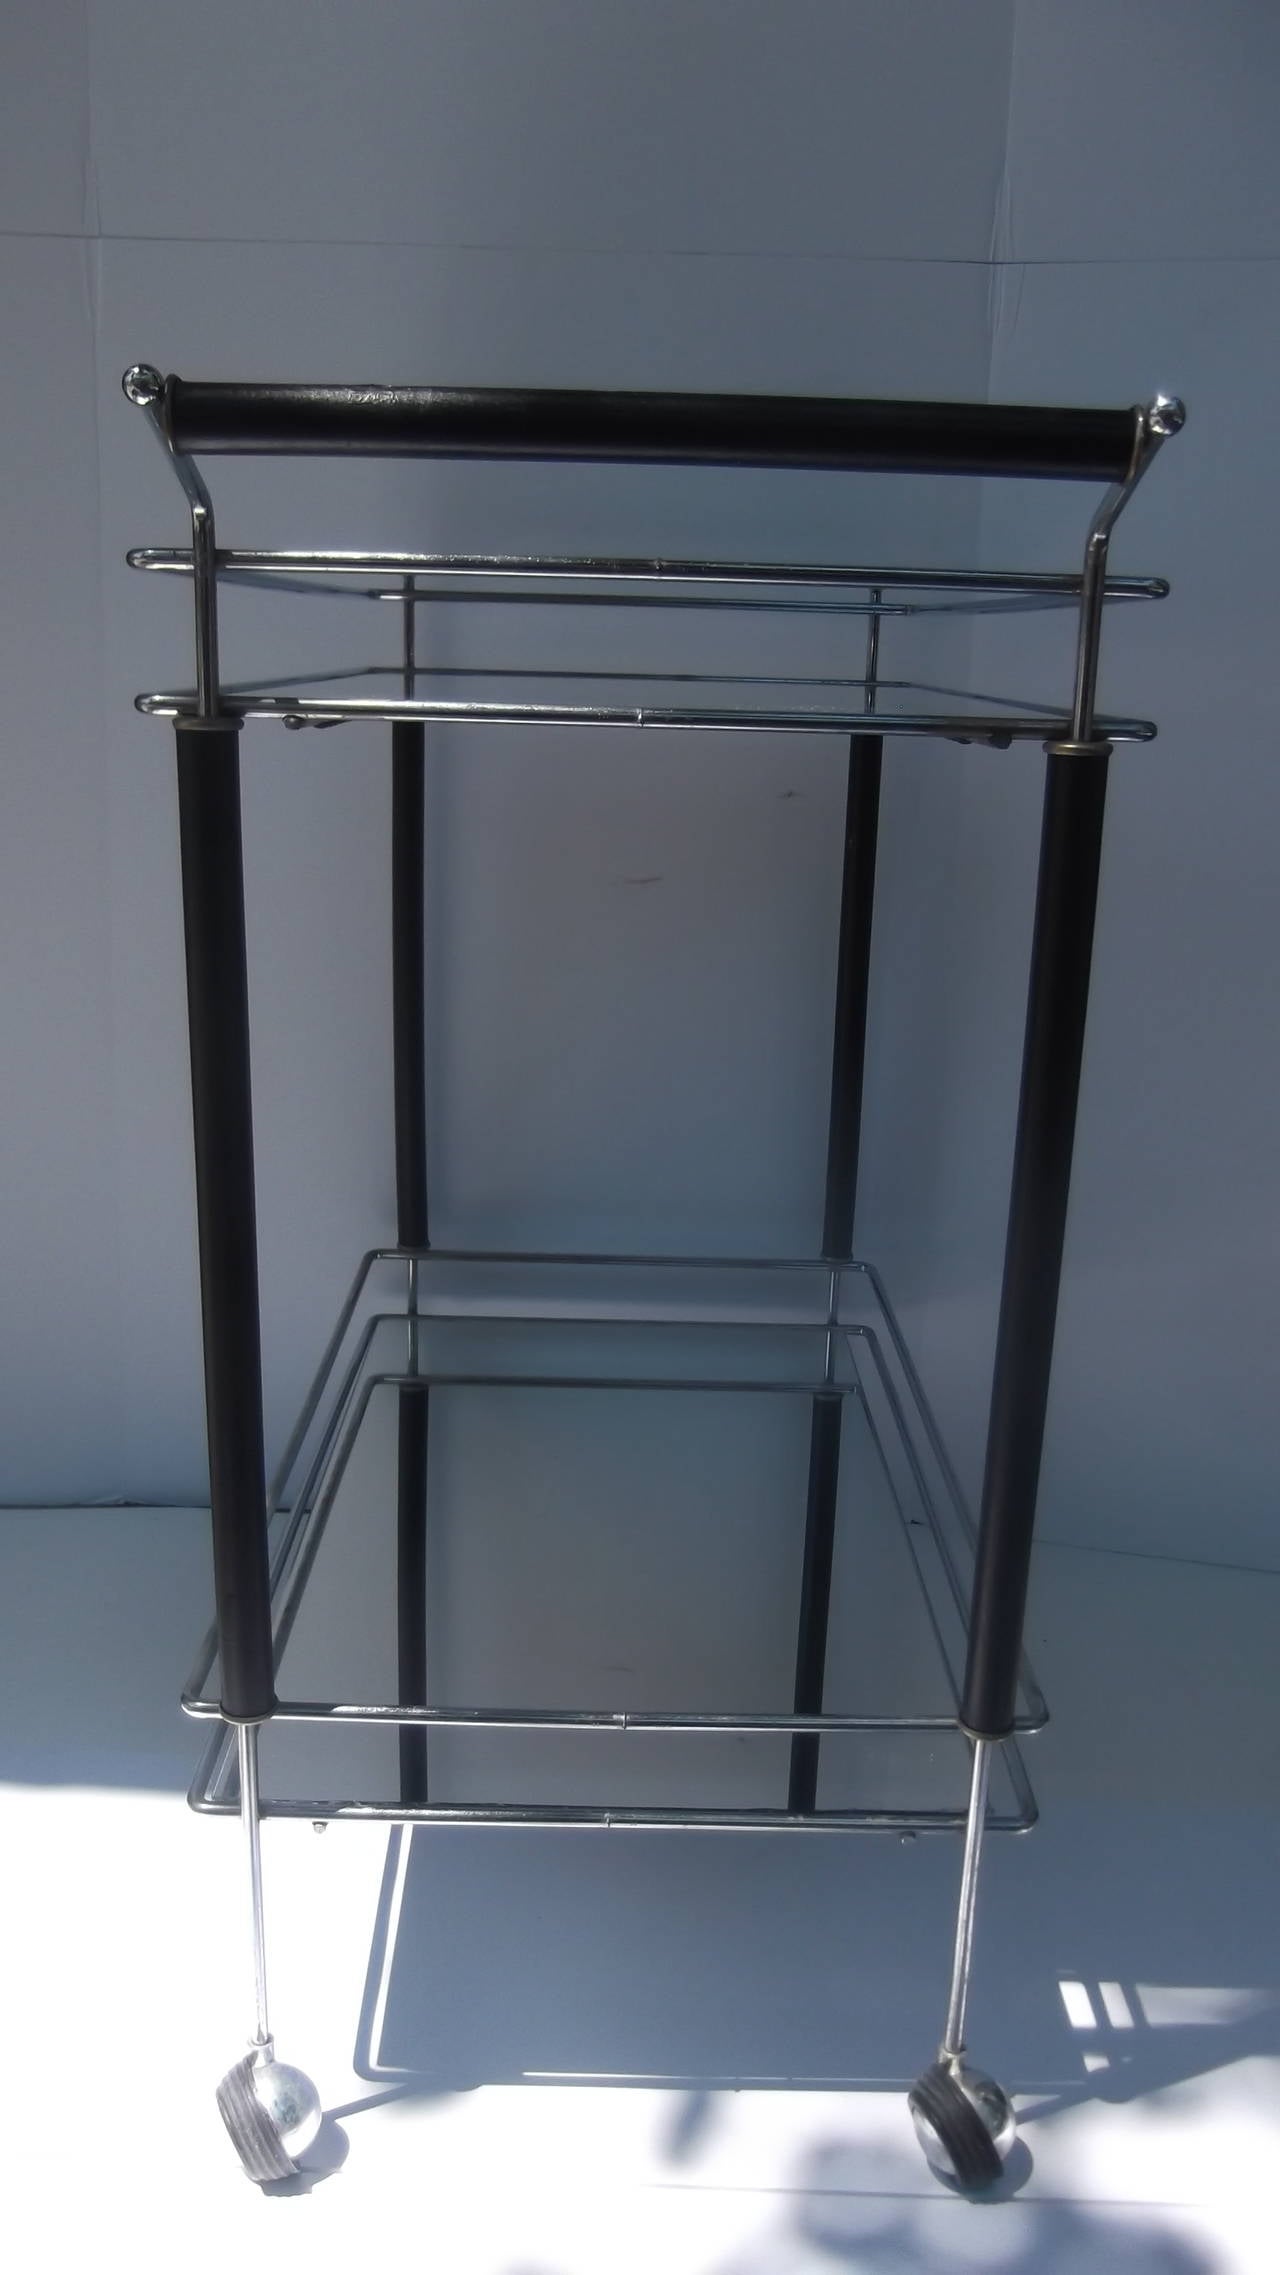 A neat rectangular two tiered cart with castors.  The shelves are mirrored rather than glass which give it a sleeker look
The chrome frame is accented with ebonized wood on the four corners and handle.  Perfect smallish size and  very usable for